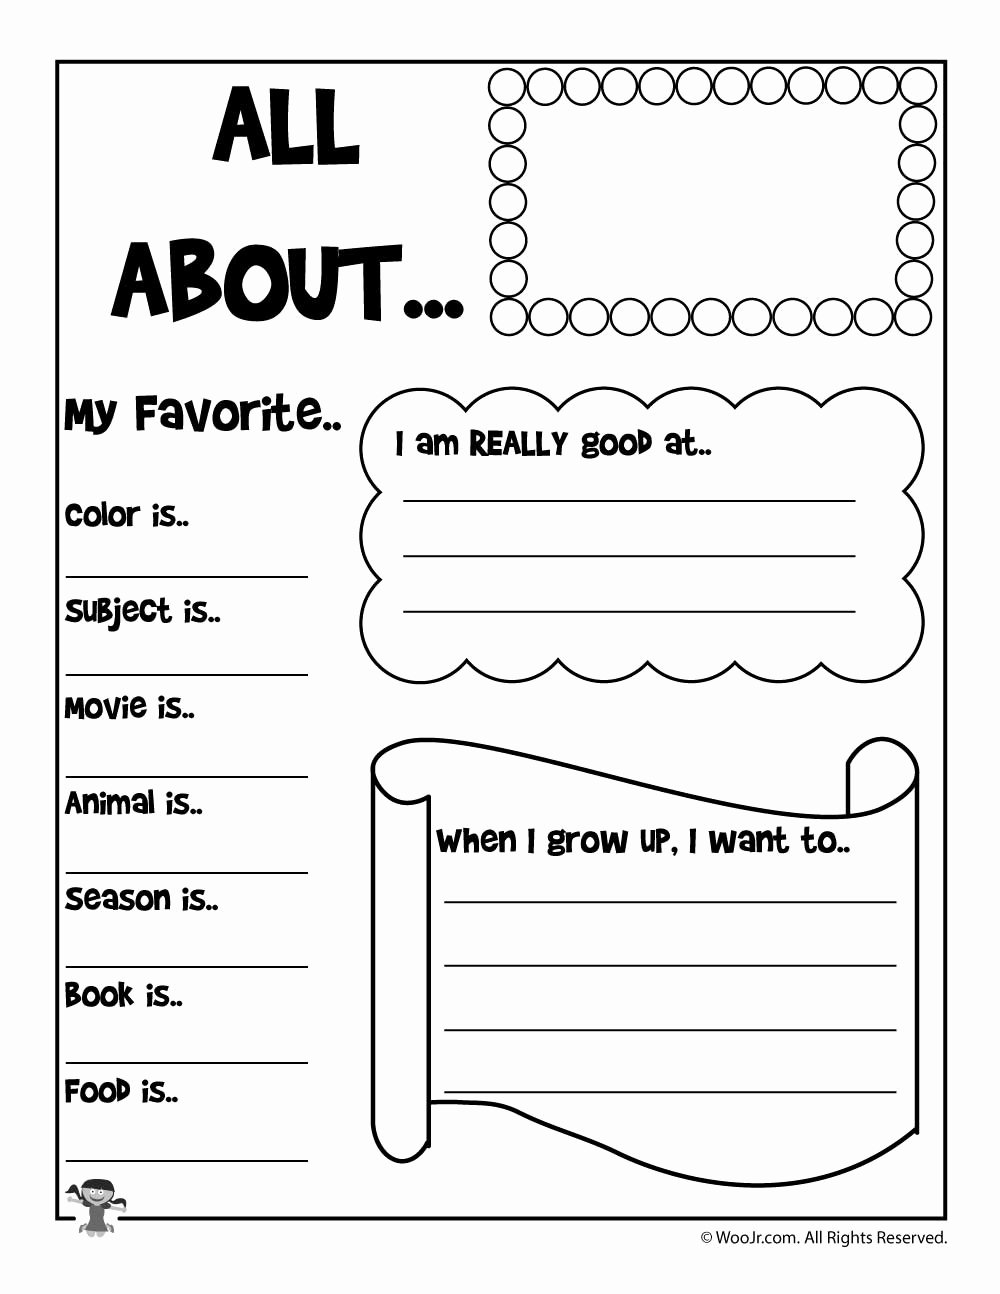 All About Me Worksheet New All About Me Printable Worksheet